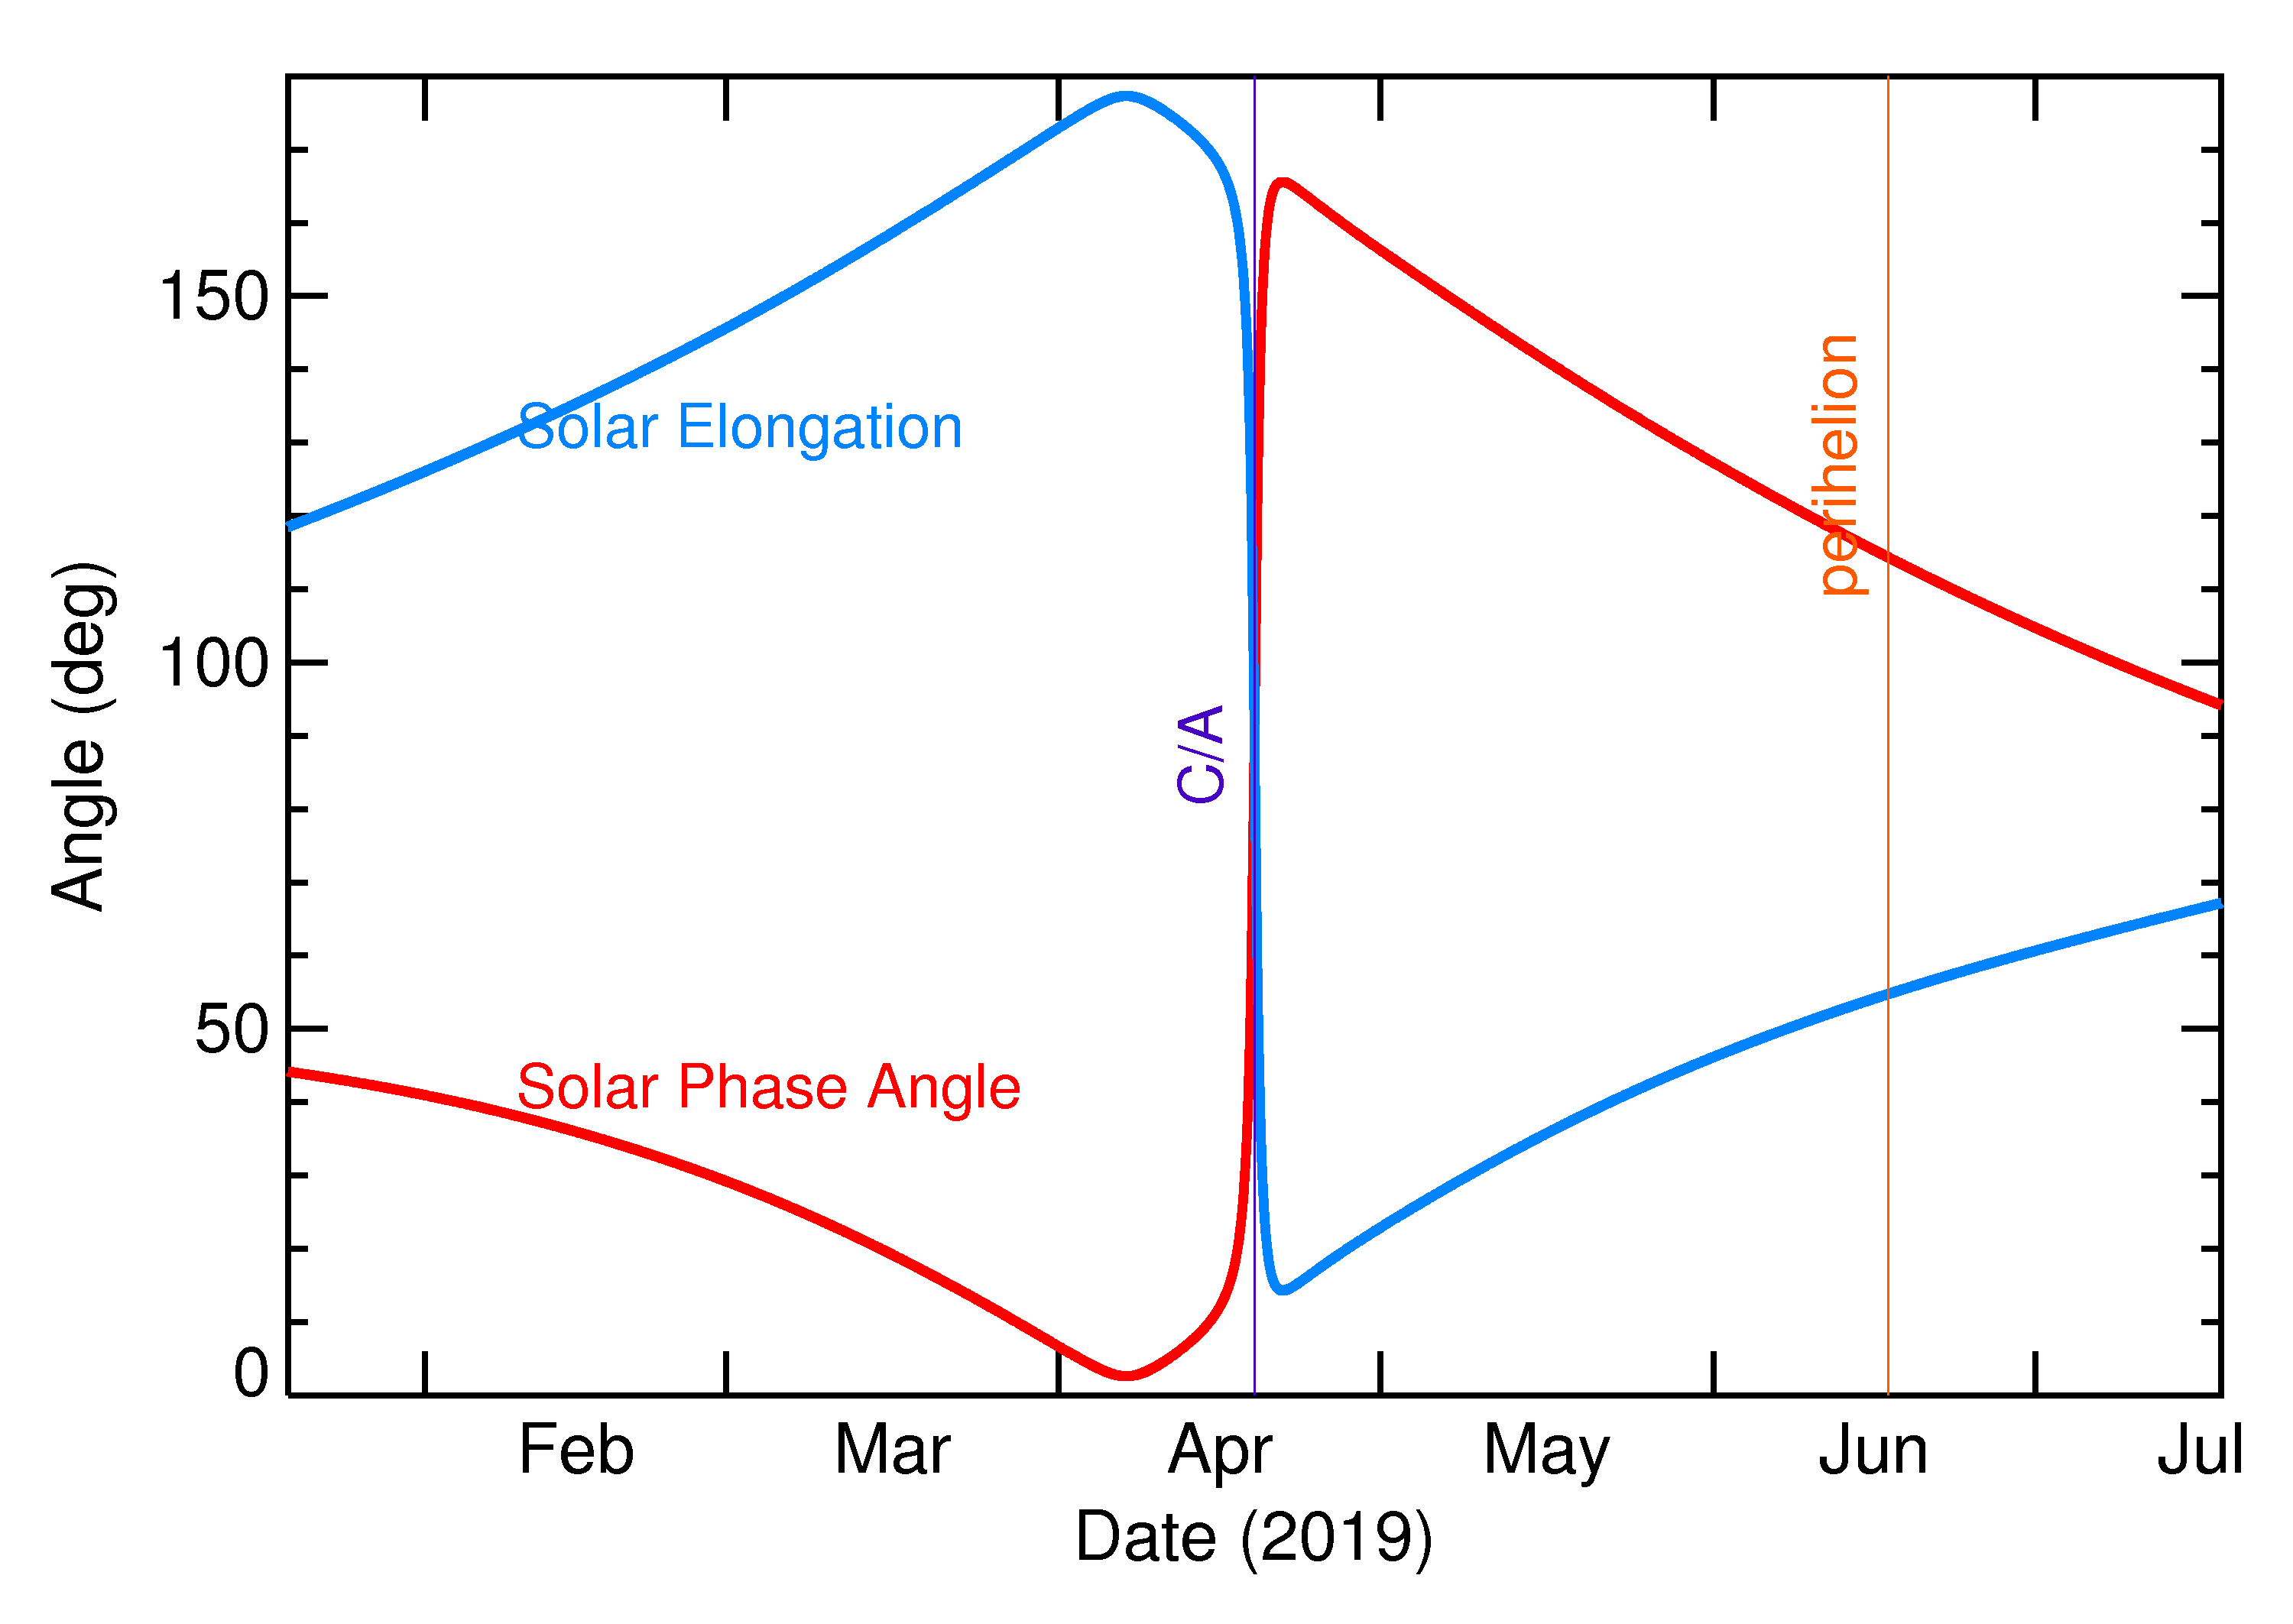 Solar Elongation and Solar Phase Angle of 2019 GC6 in the months around closest approach